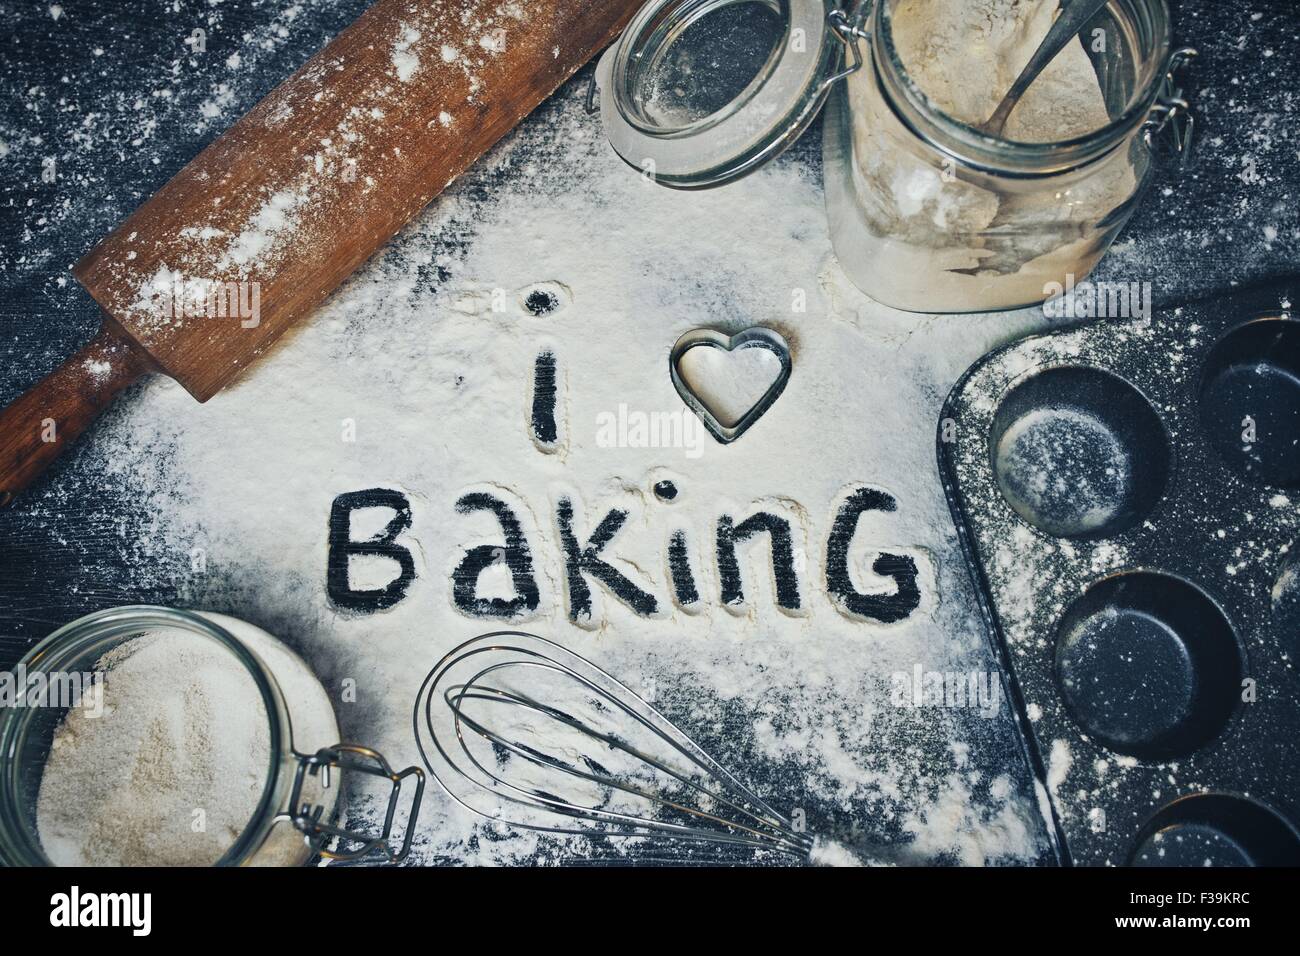 I Love Baking written in flour on a table Stock Photo